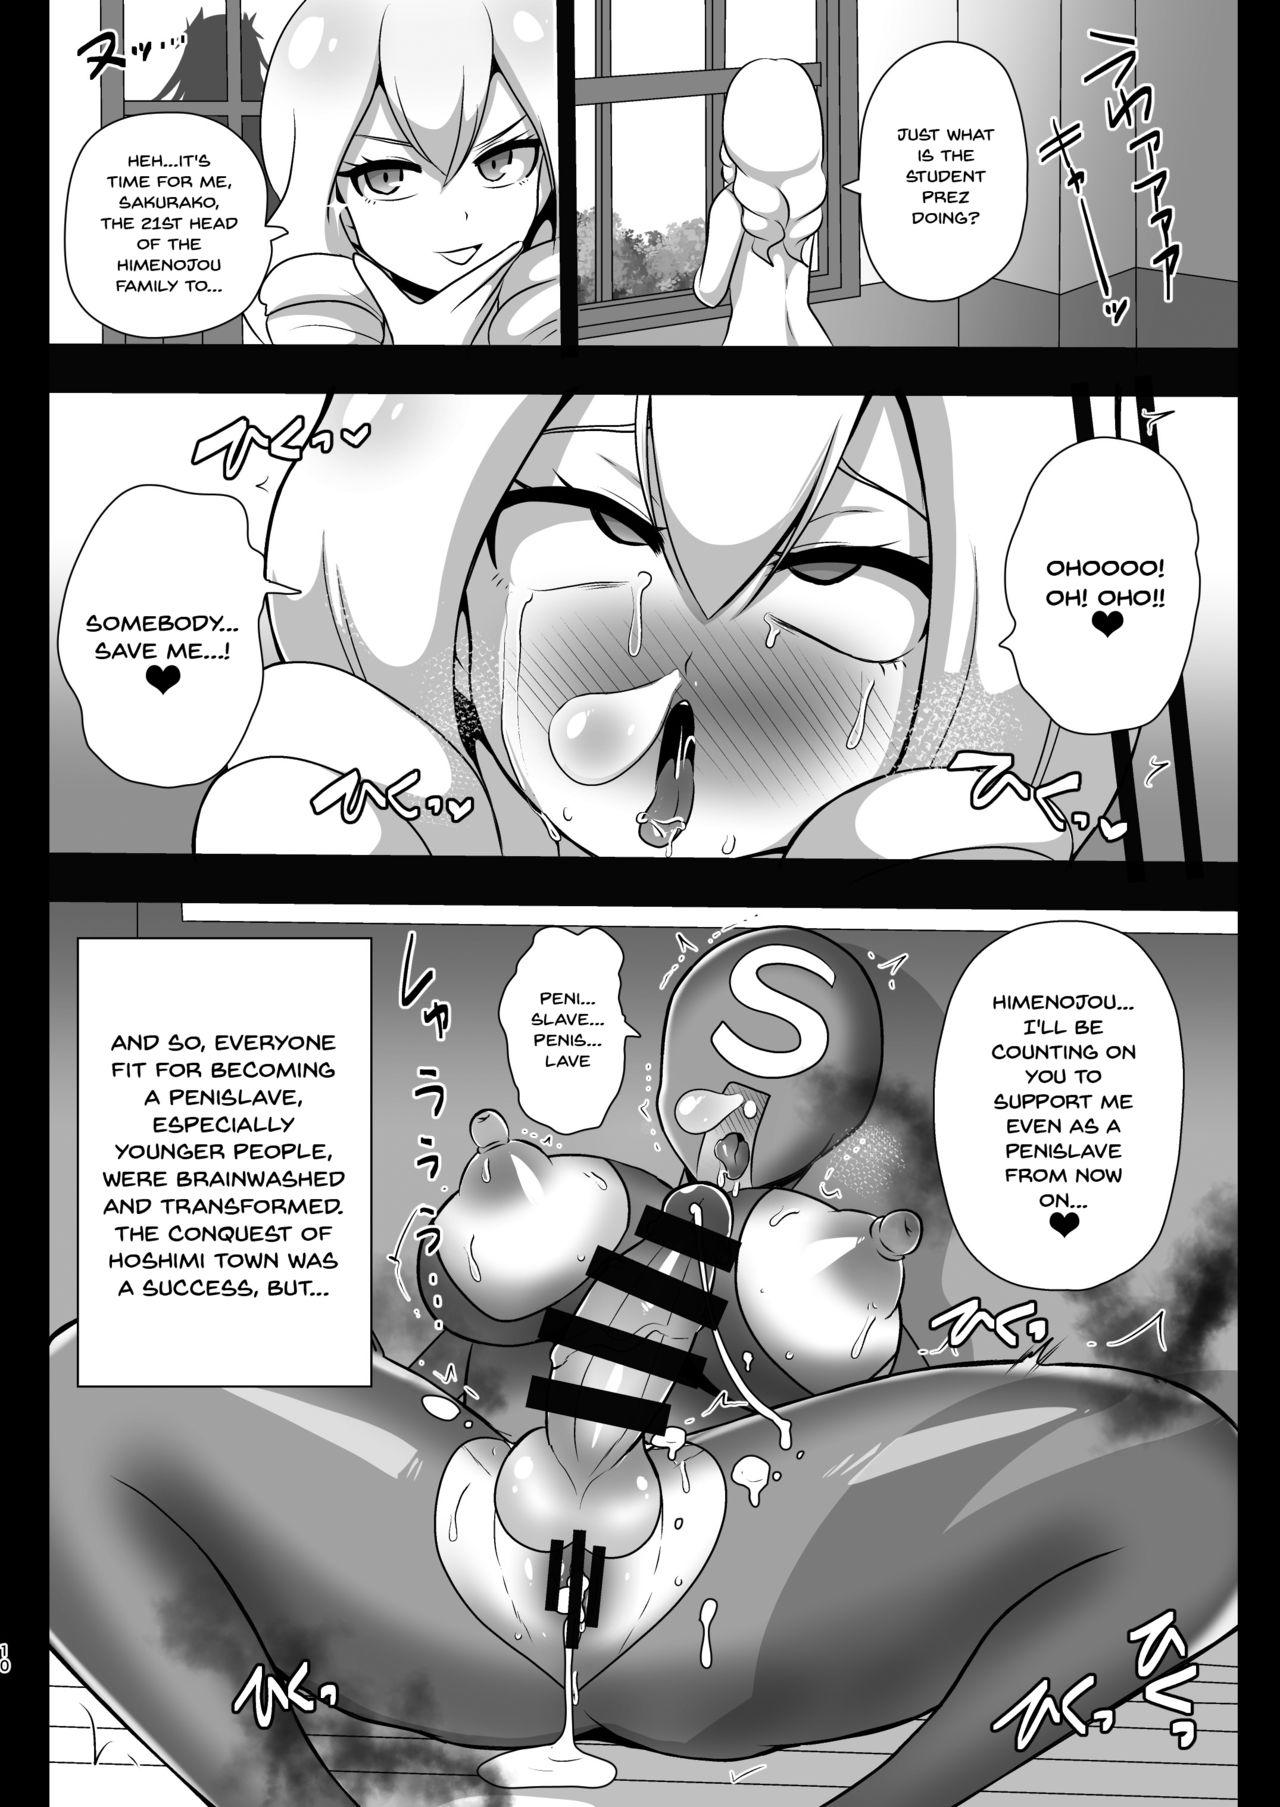 Korea Space Invader MaraCure - Star twinkle precure Hot Naked Girl - Page 10